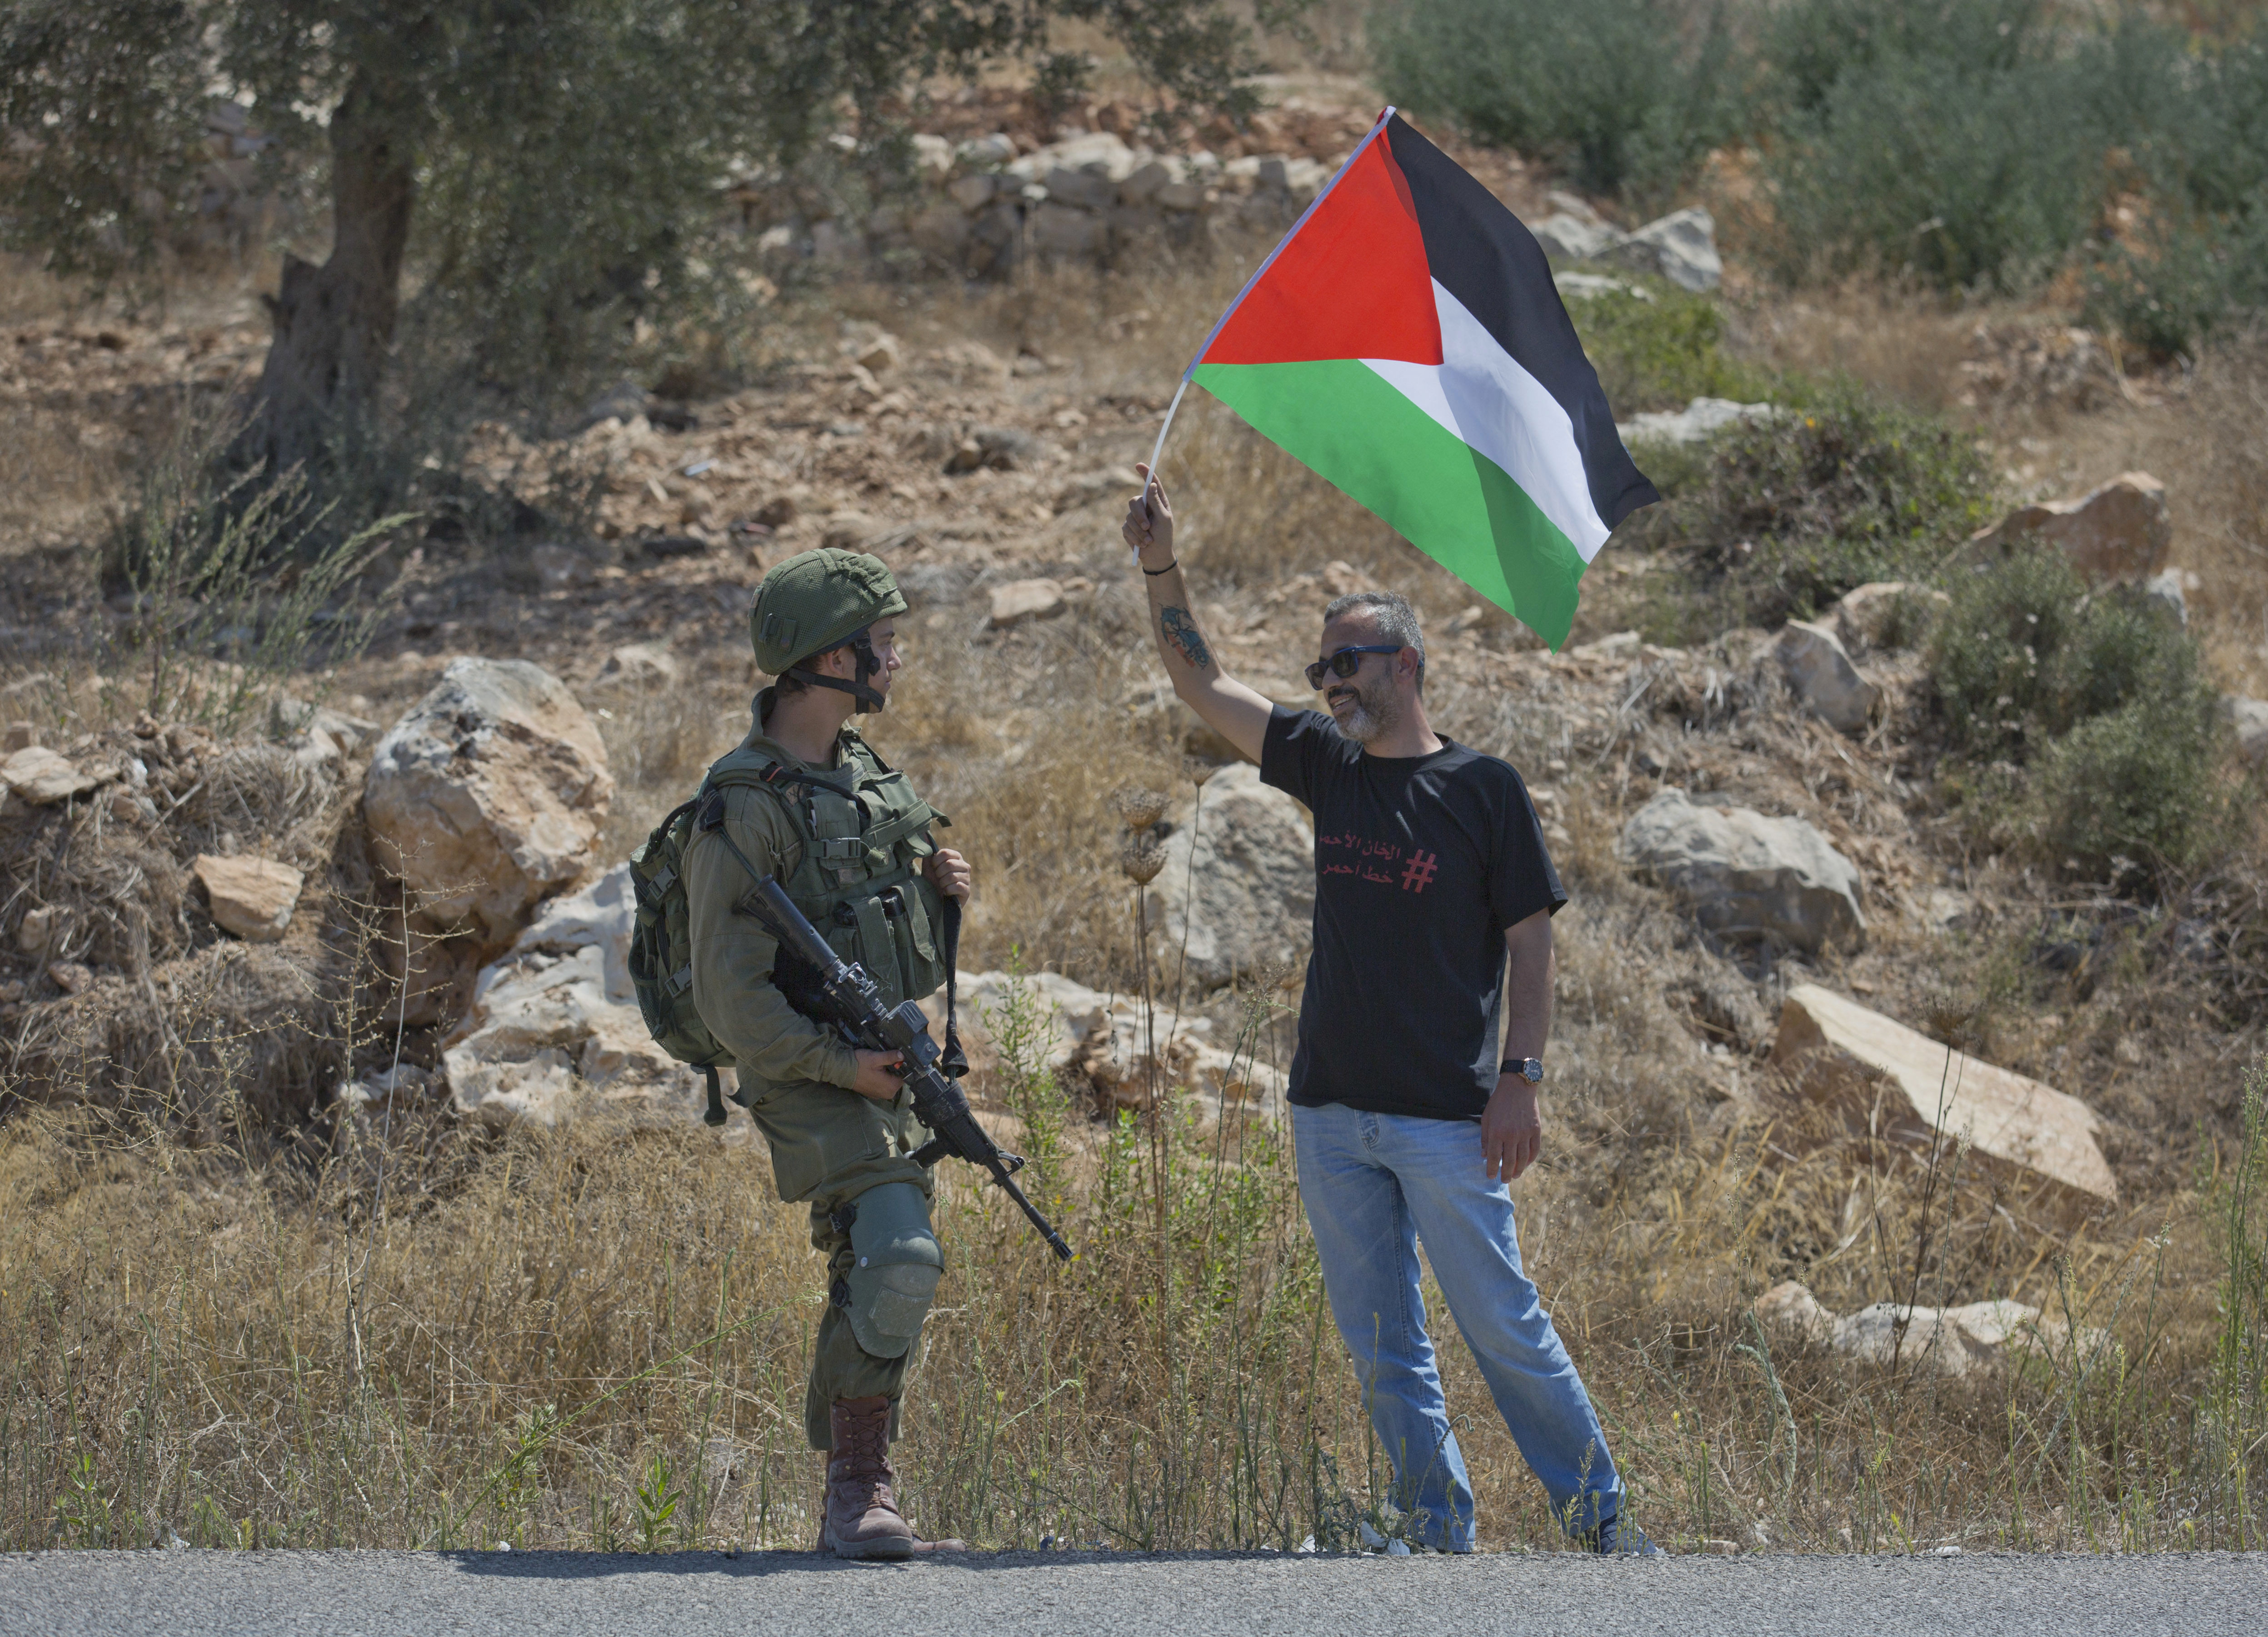 A protester flies a Palestinian flag in front of an Israeli soldier while army excavators and bulldozers continue, for the second day, to work at the lands of the West Bank village of Ras Karkar, near Ramallah, Wednesday, Aug. 29, 2018. (AP Photo/Nasser Nasser)